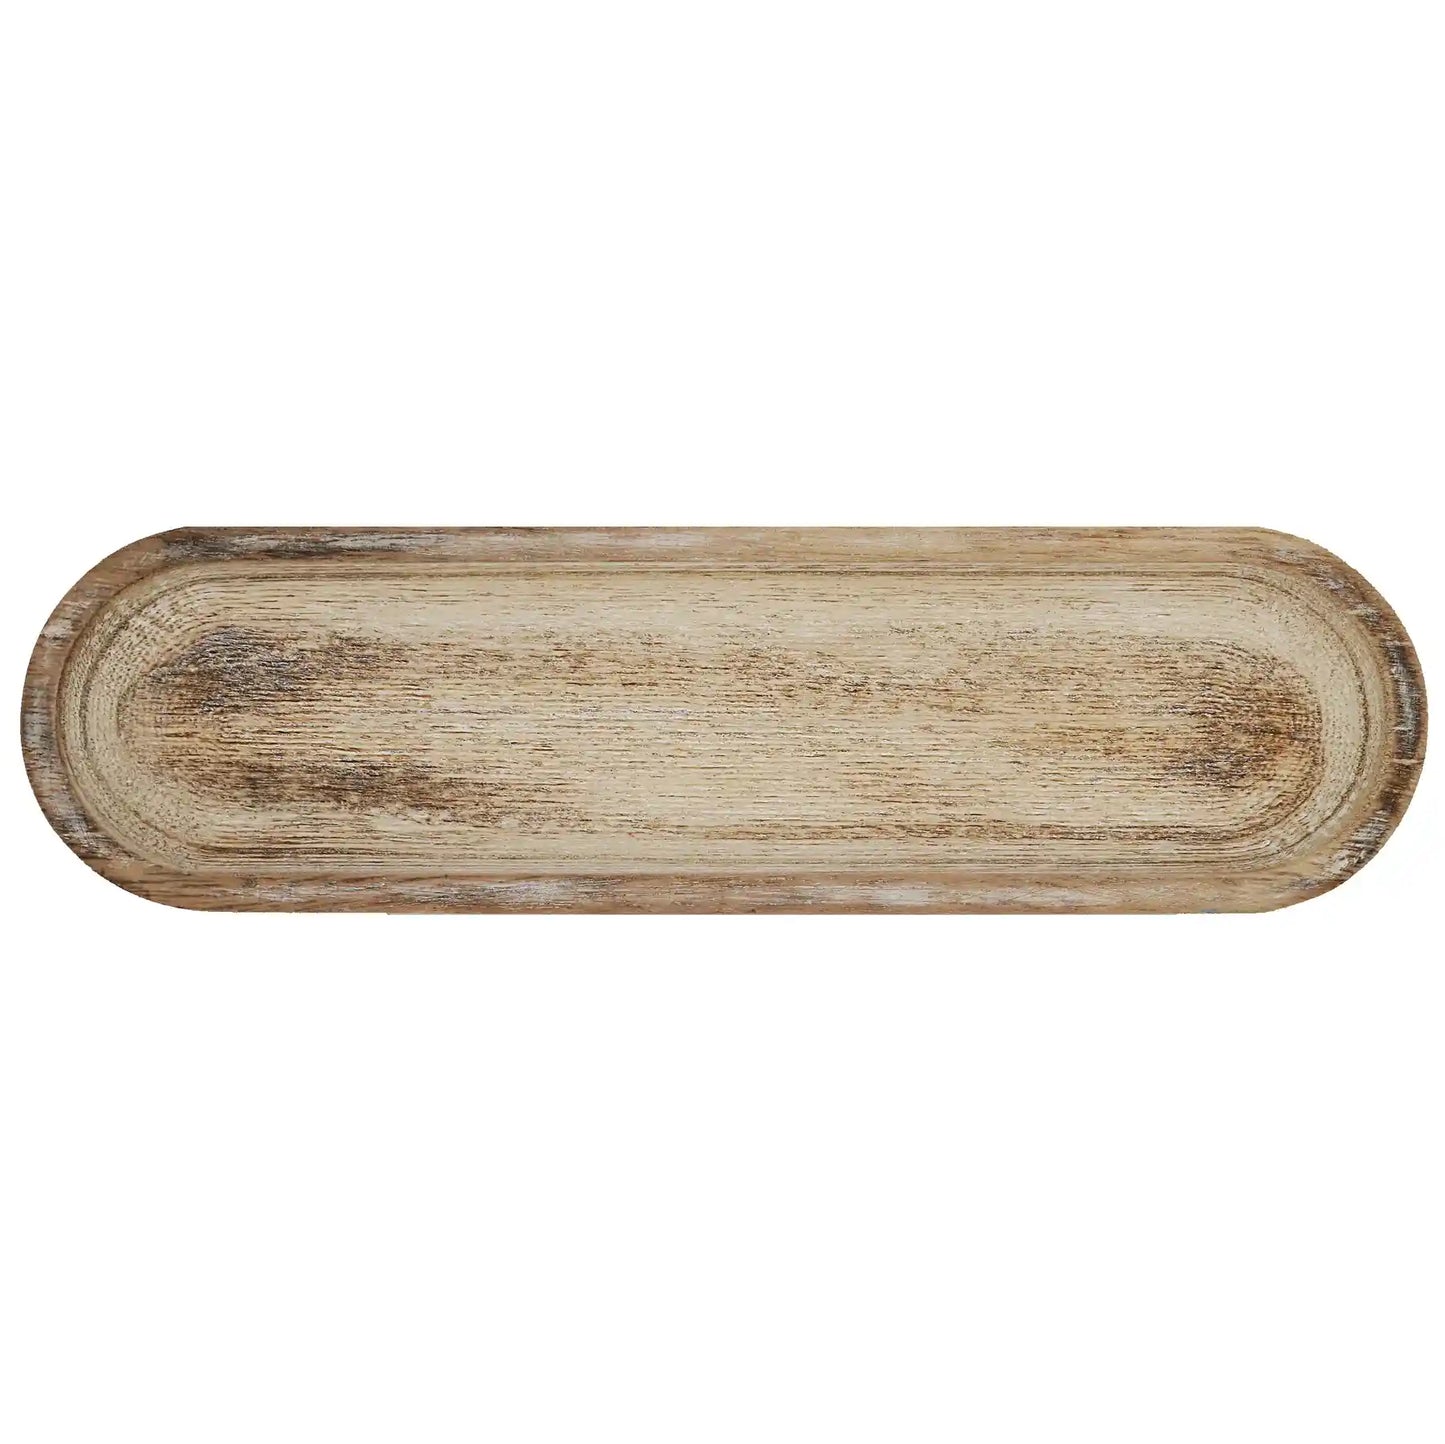 Large Oval Wood Tray Styled